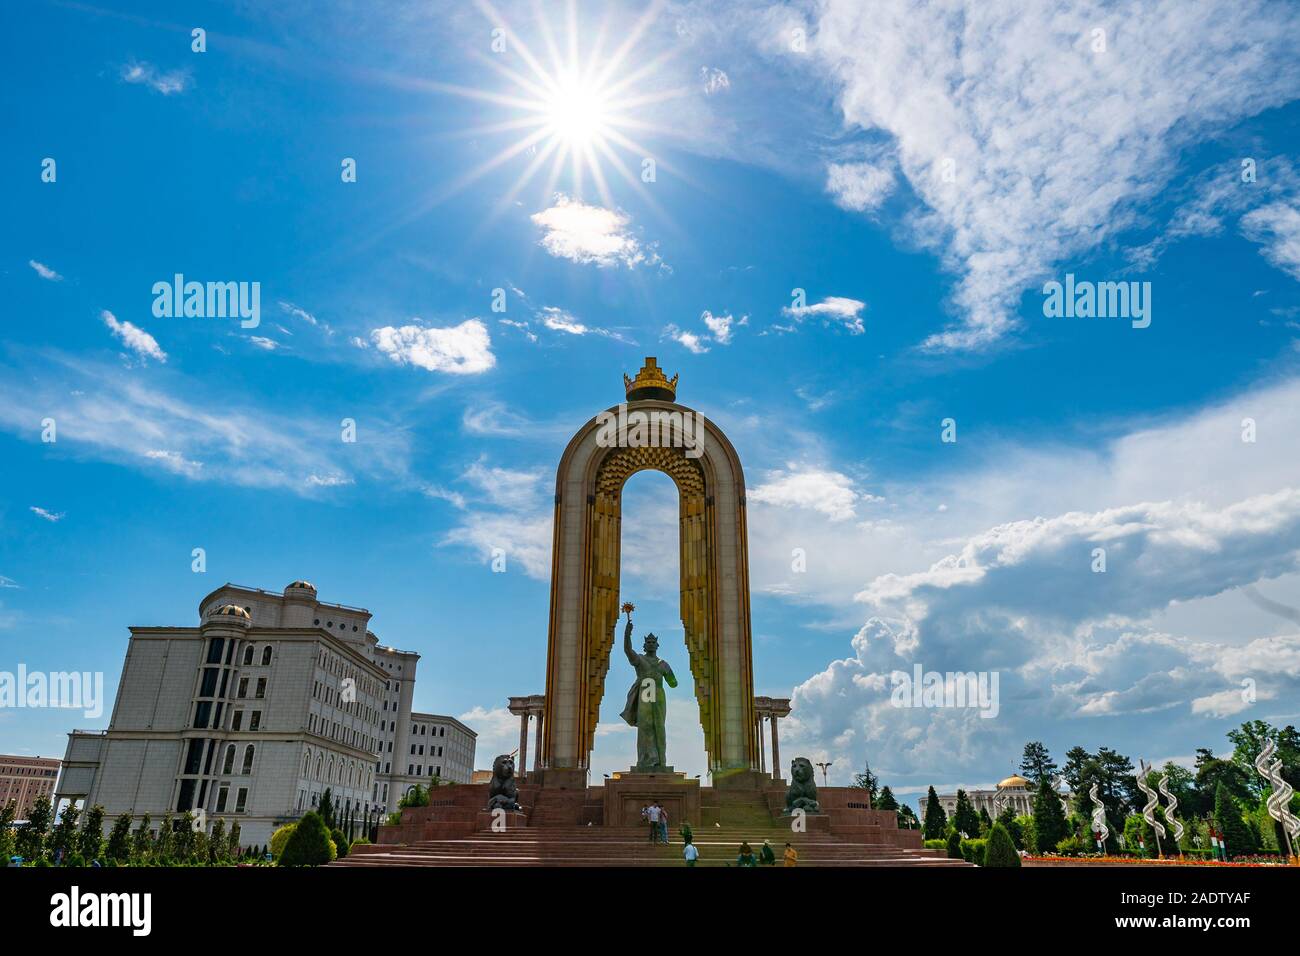 Dushanbe Ismoil Somoni Holding with his Right Hand a Scepter Statue Picturesque View on a Sunny Blue Sky Day Stock Photo